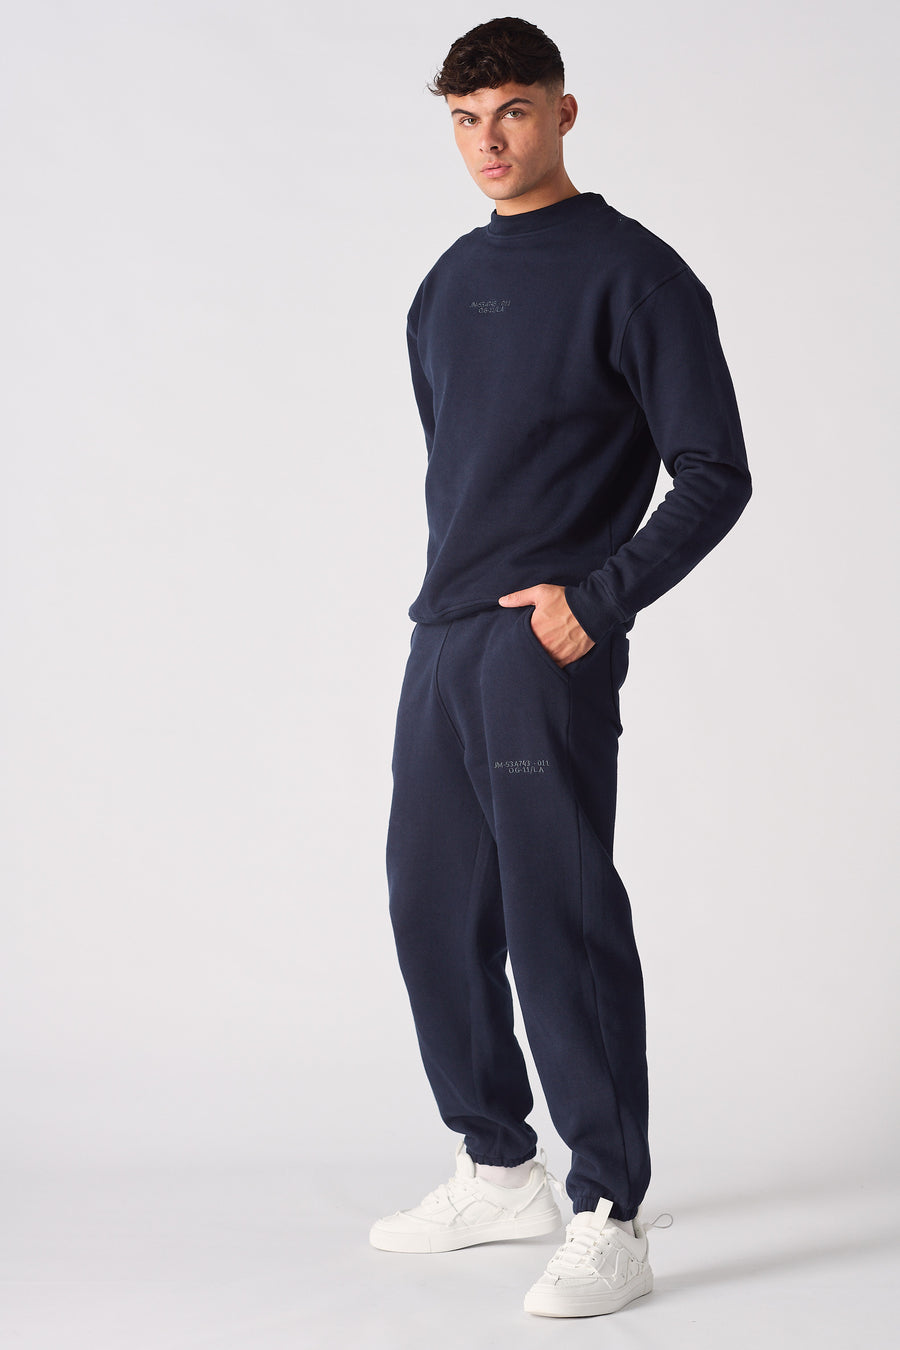 EMBROIDERY DETAIL TRACKSUIT SWEATSHIRT - NAVY BLUE